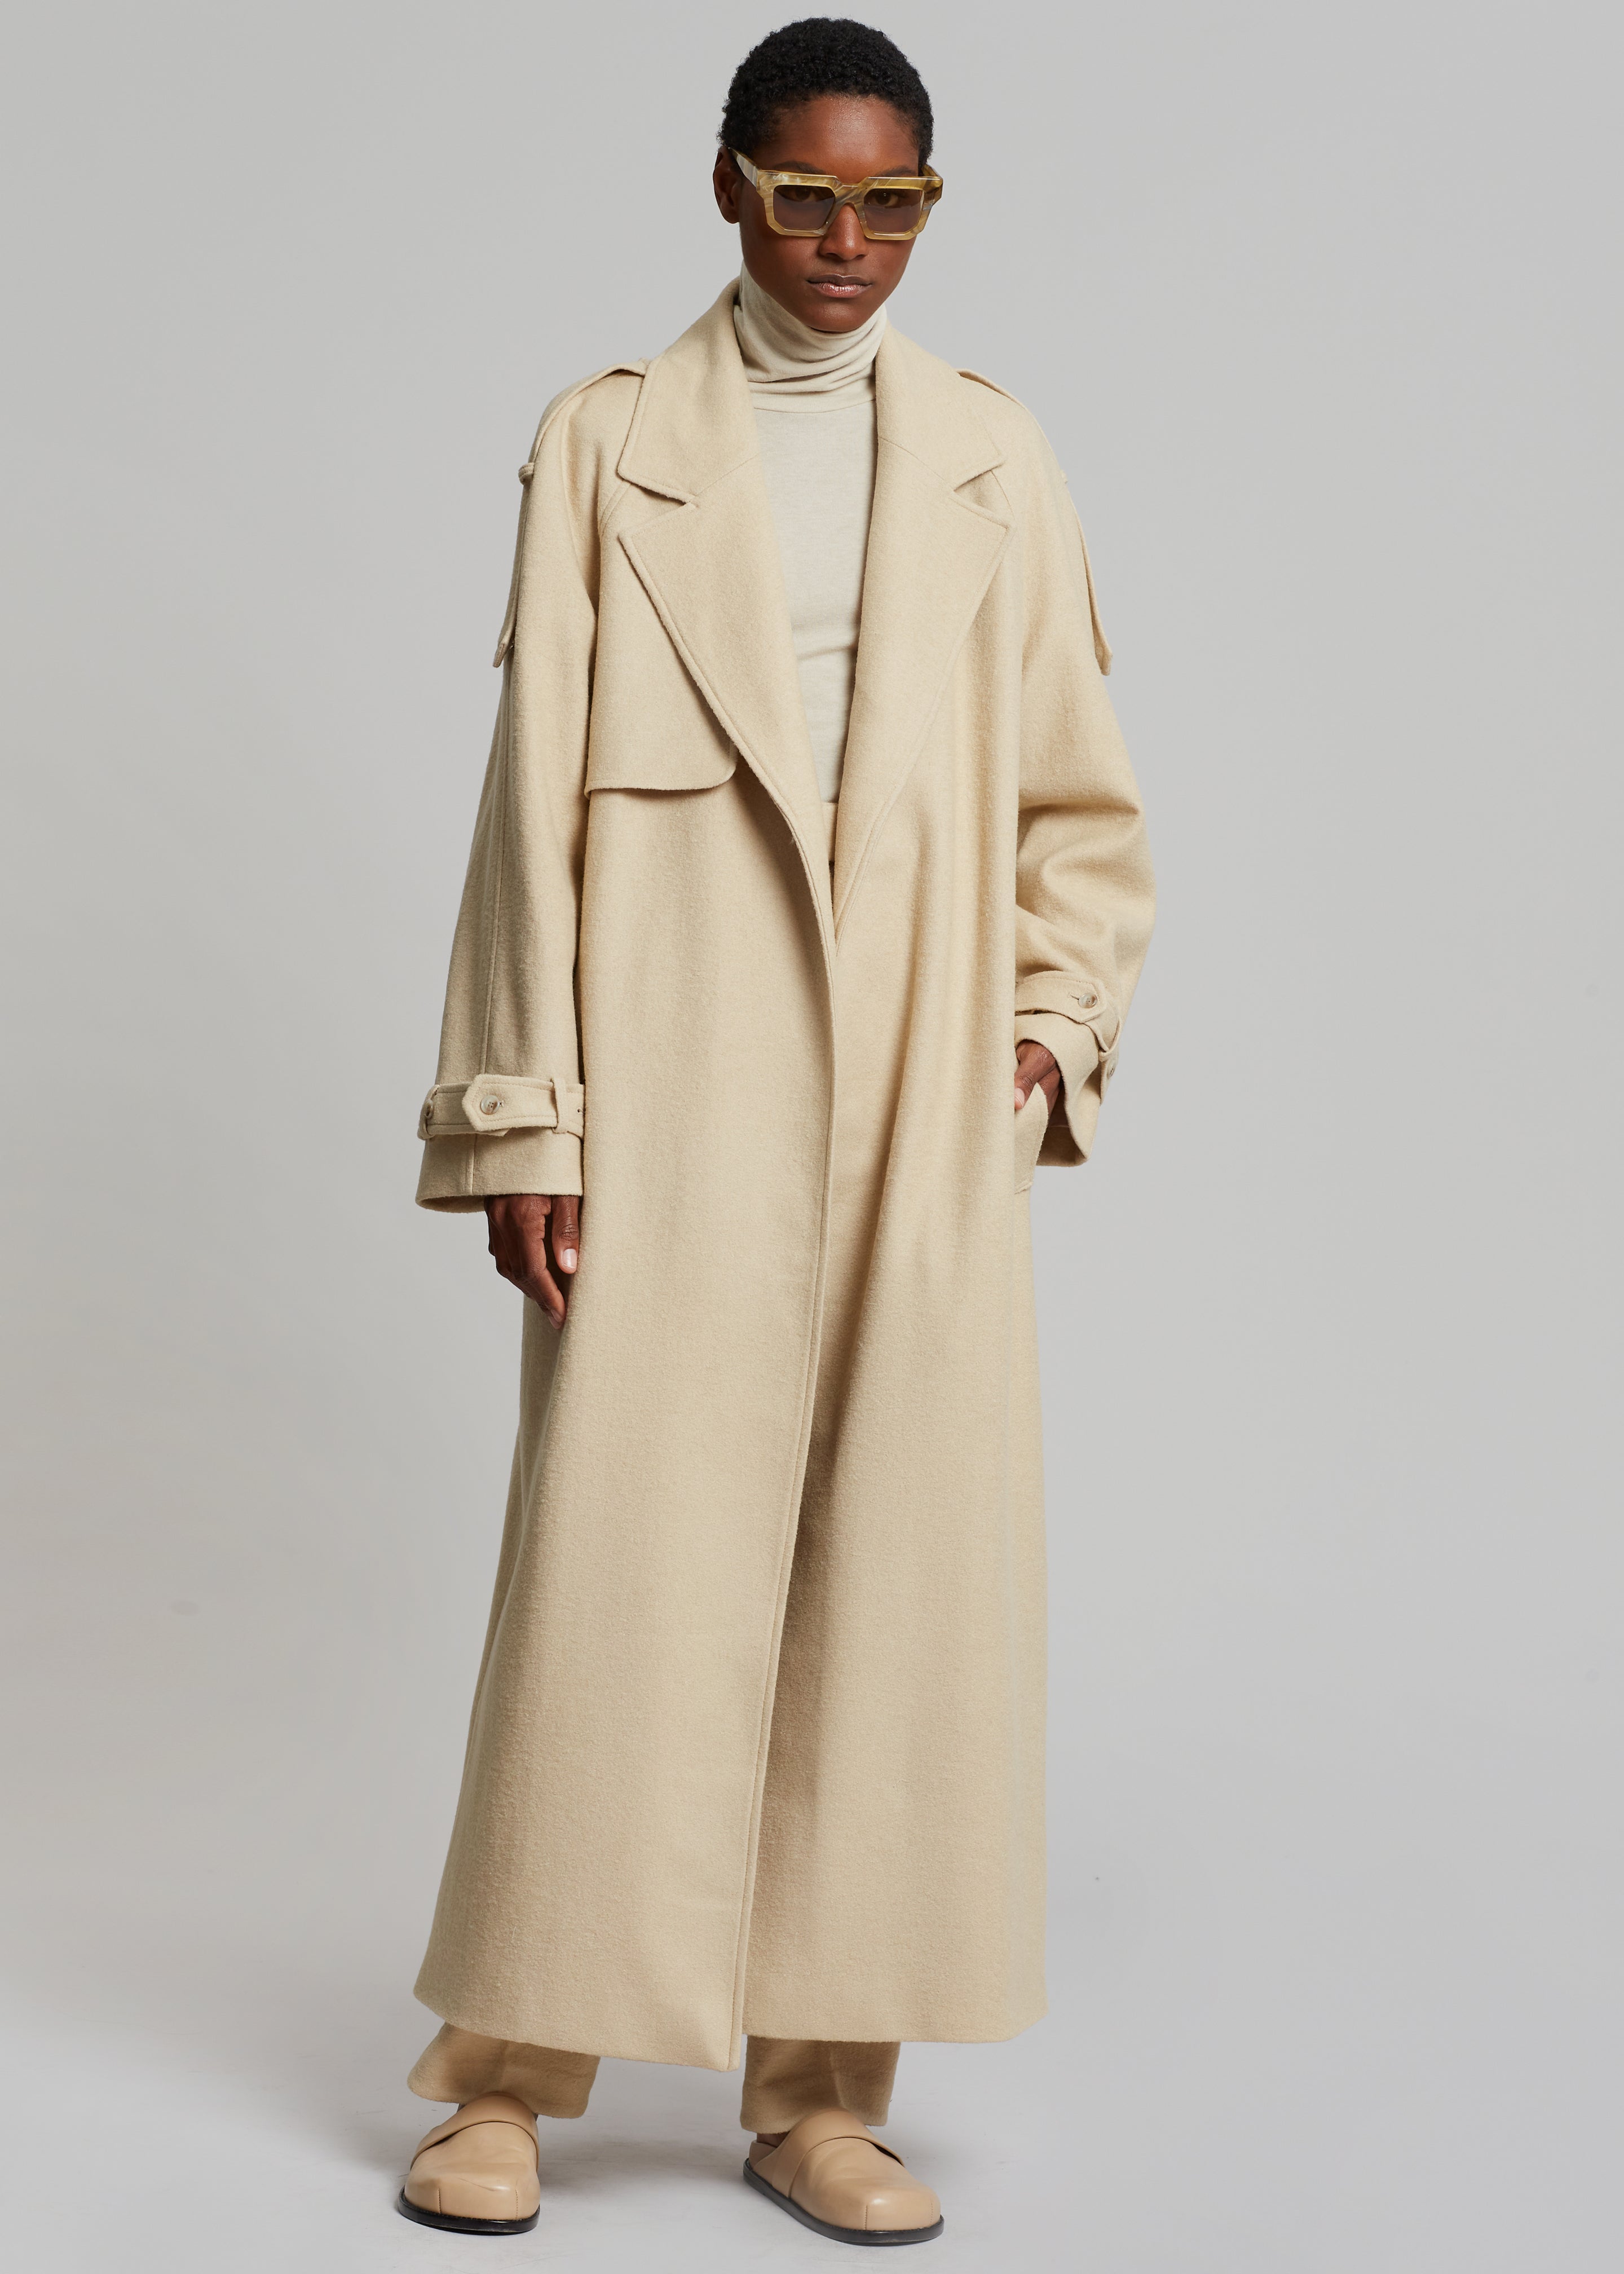 Suzanne Boiled Wool Trench Coat - Beige – The Frankie Shop